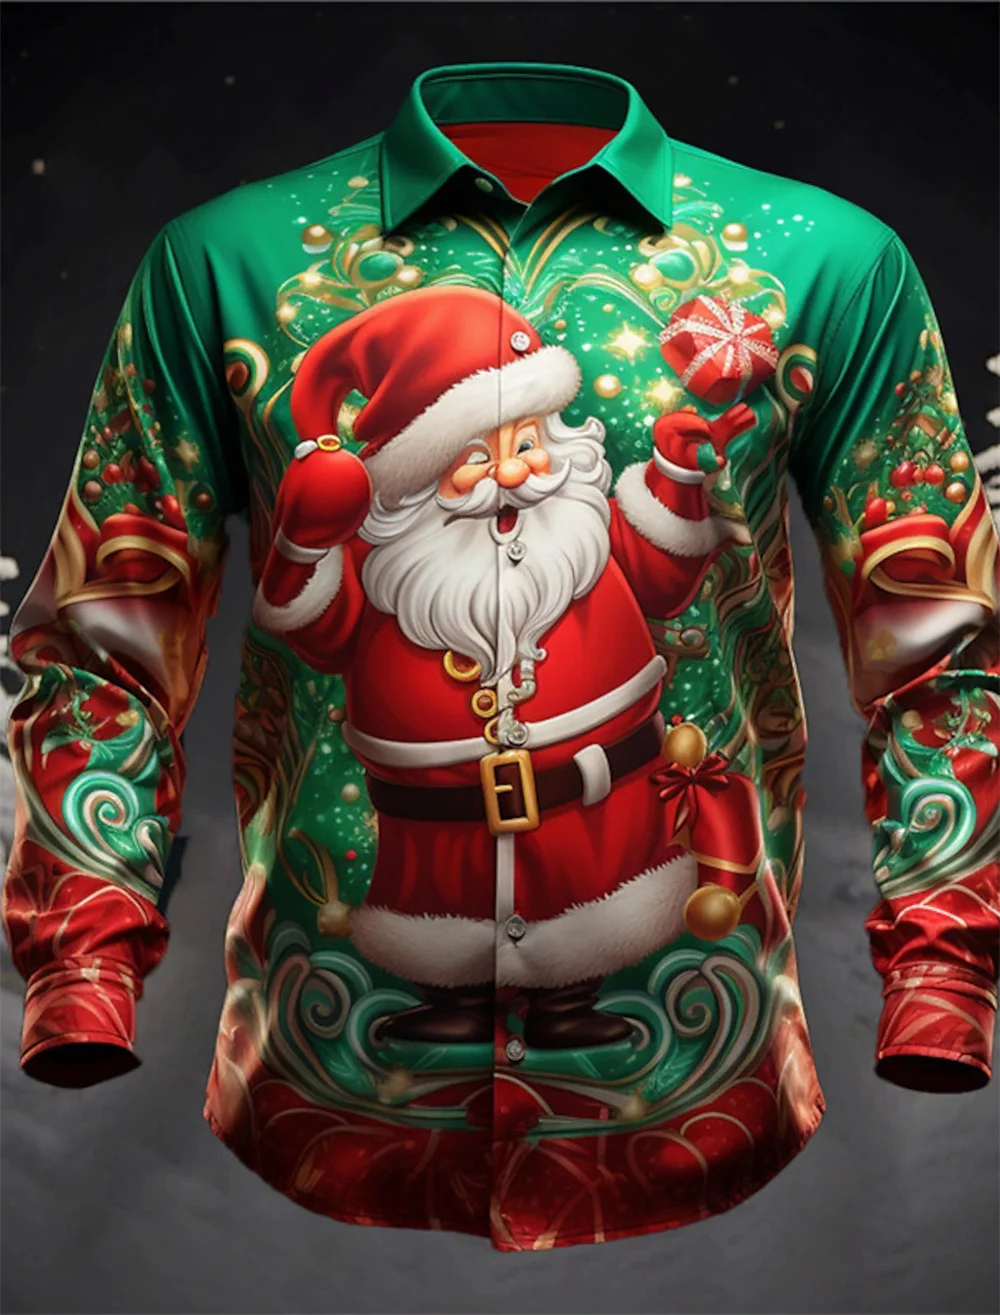 New men's cardigan long sleeved button up shirt party men's high-quality street clothing Santa Claus shirt New Year gift 2024